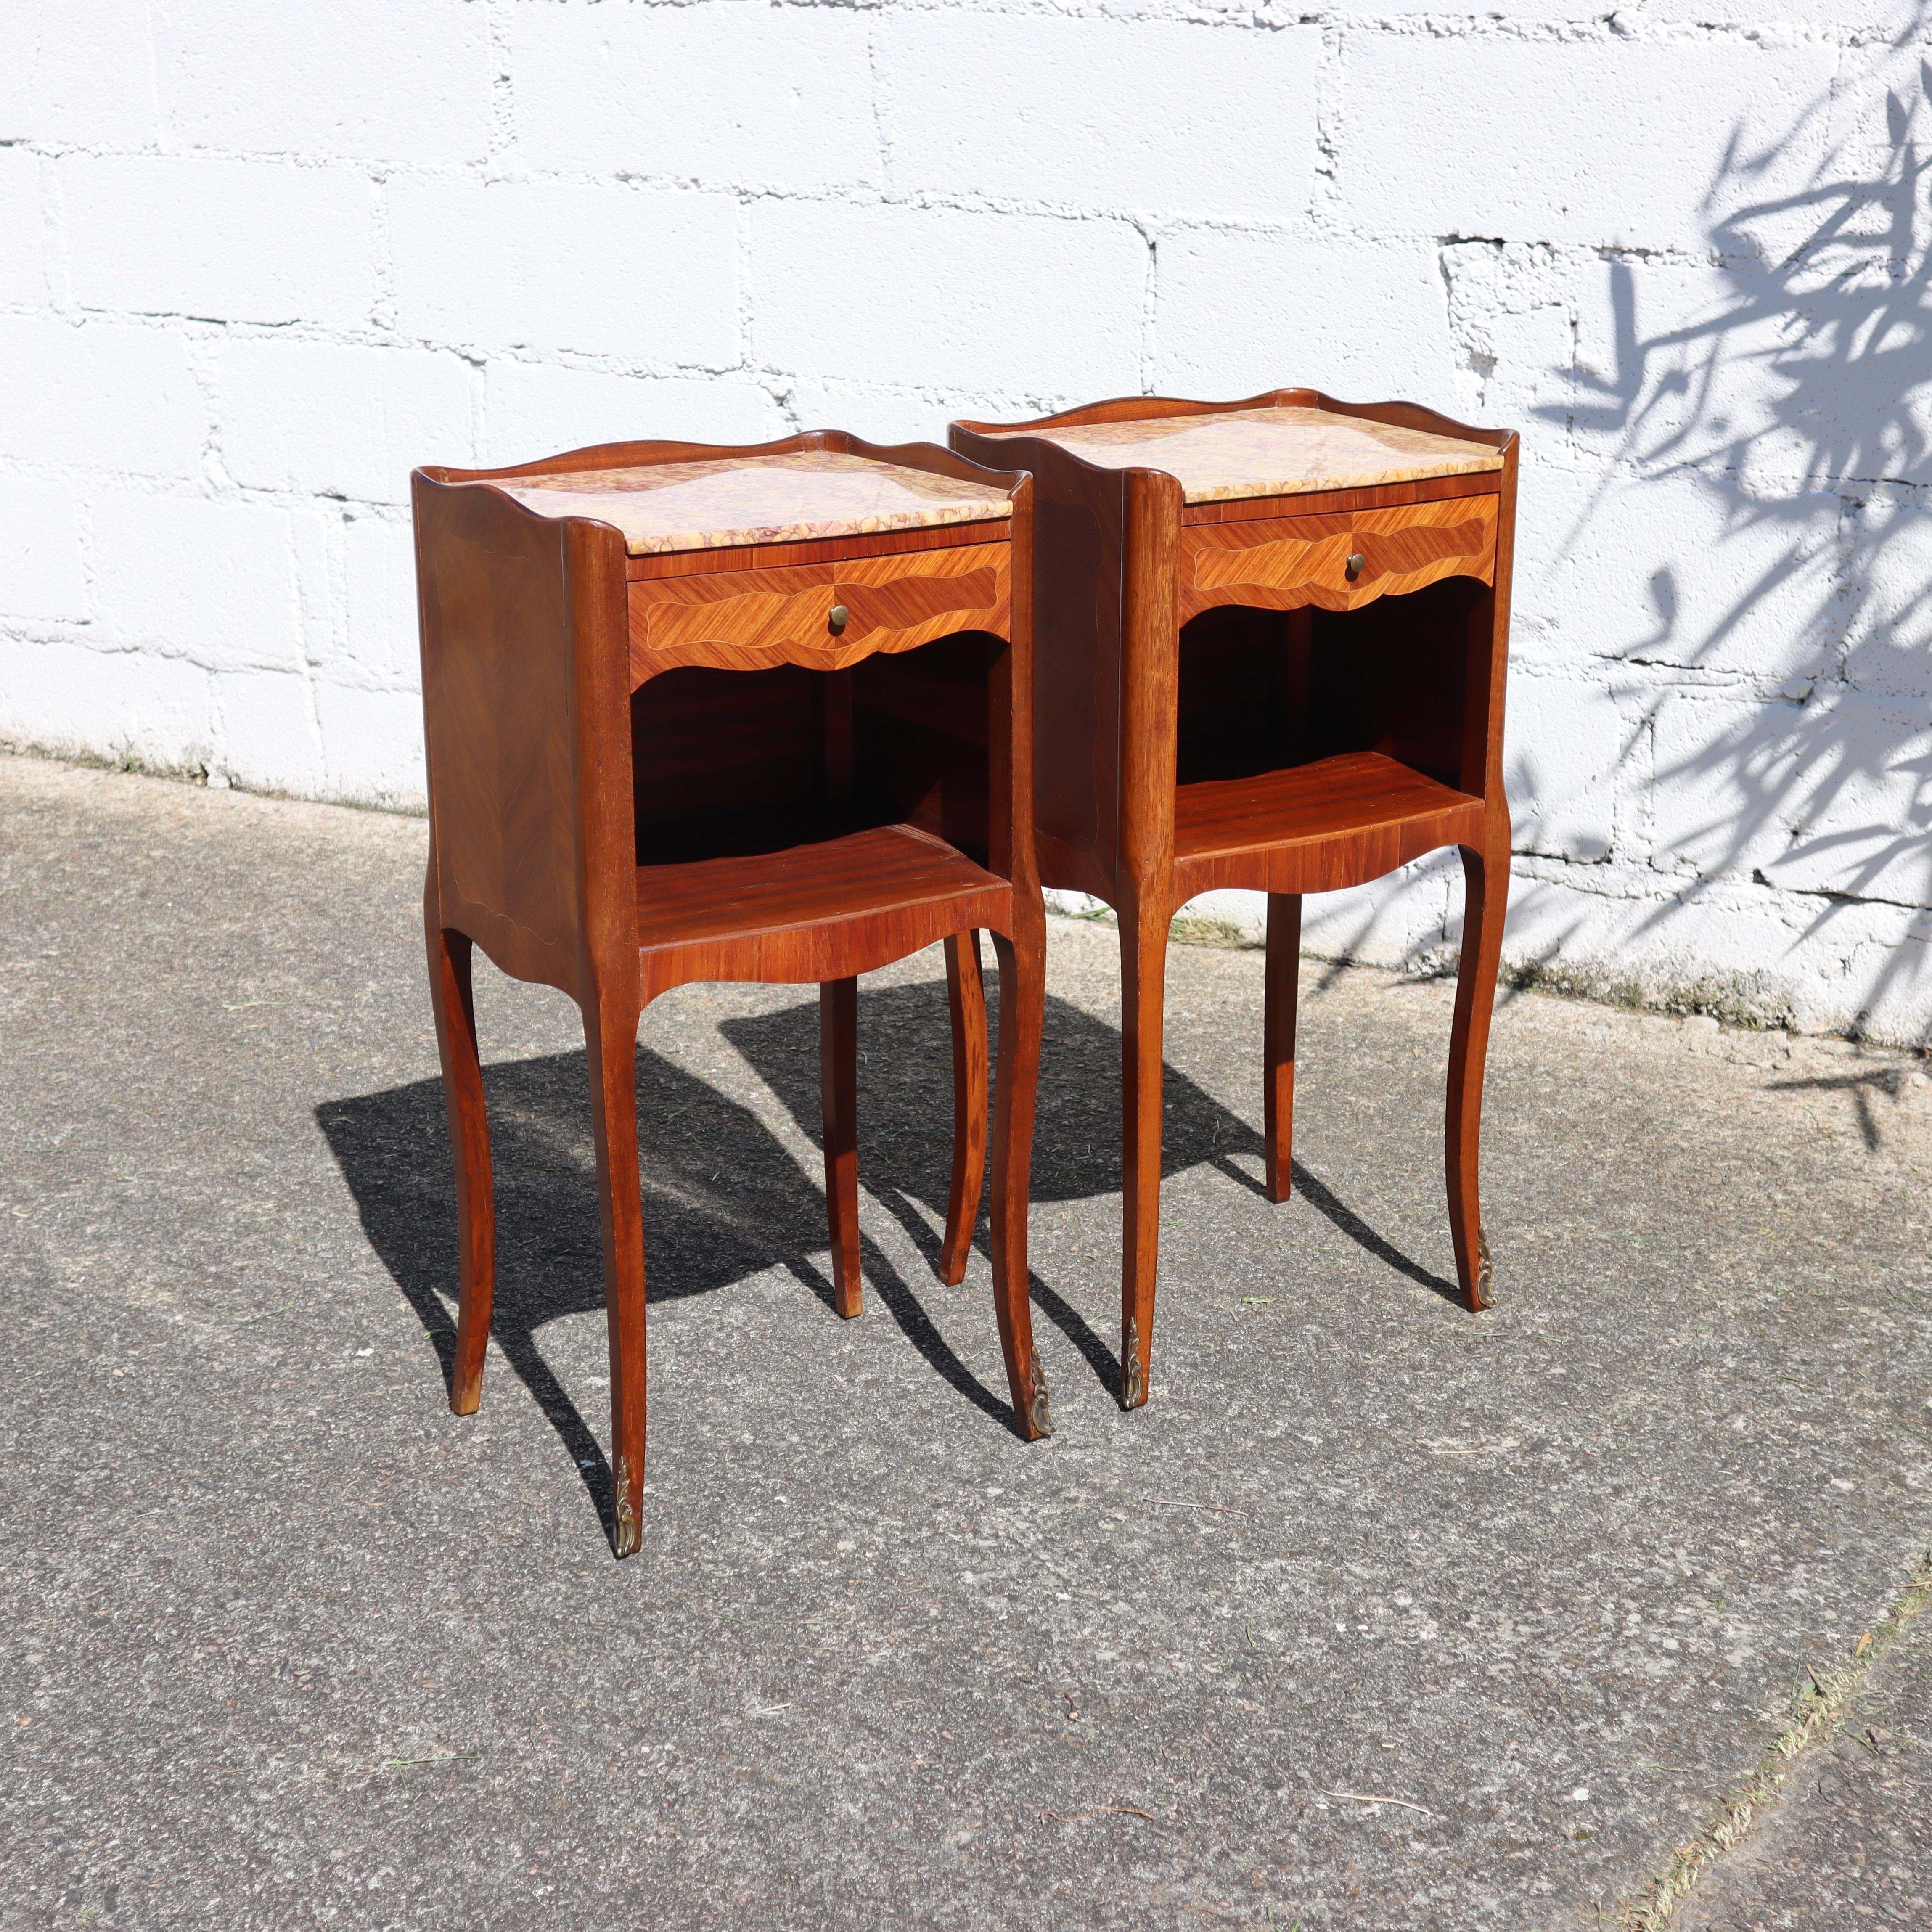 2 French Antique Rosewood Marquetry Nightstands-Pair Marble&Wood Night Tables  In Good Condition For Sale In Bussiere Dunoise, Nouvel Aquitaine